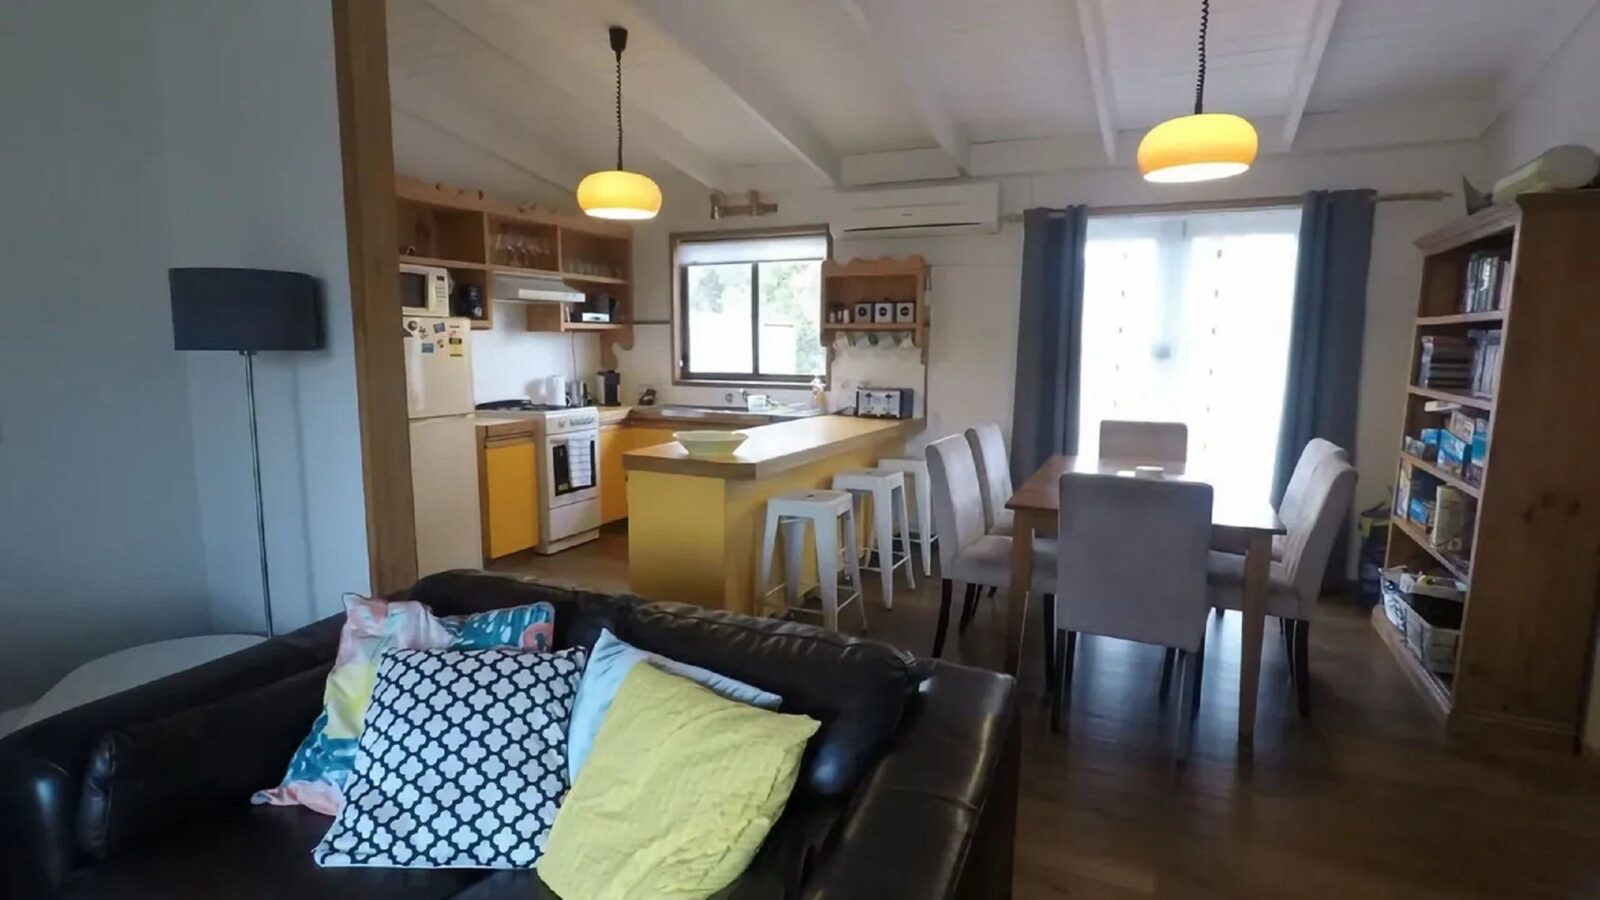 Retro style cottage with comfortable couch, table with seating for 6 and functional kitchen